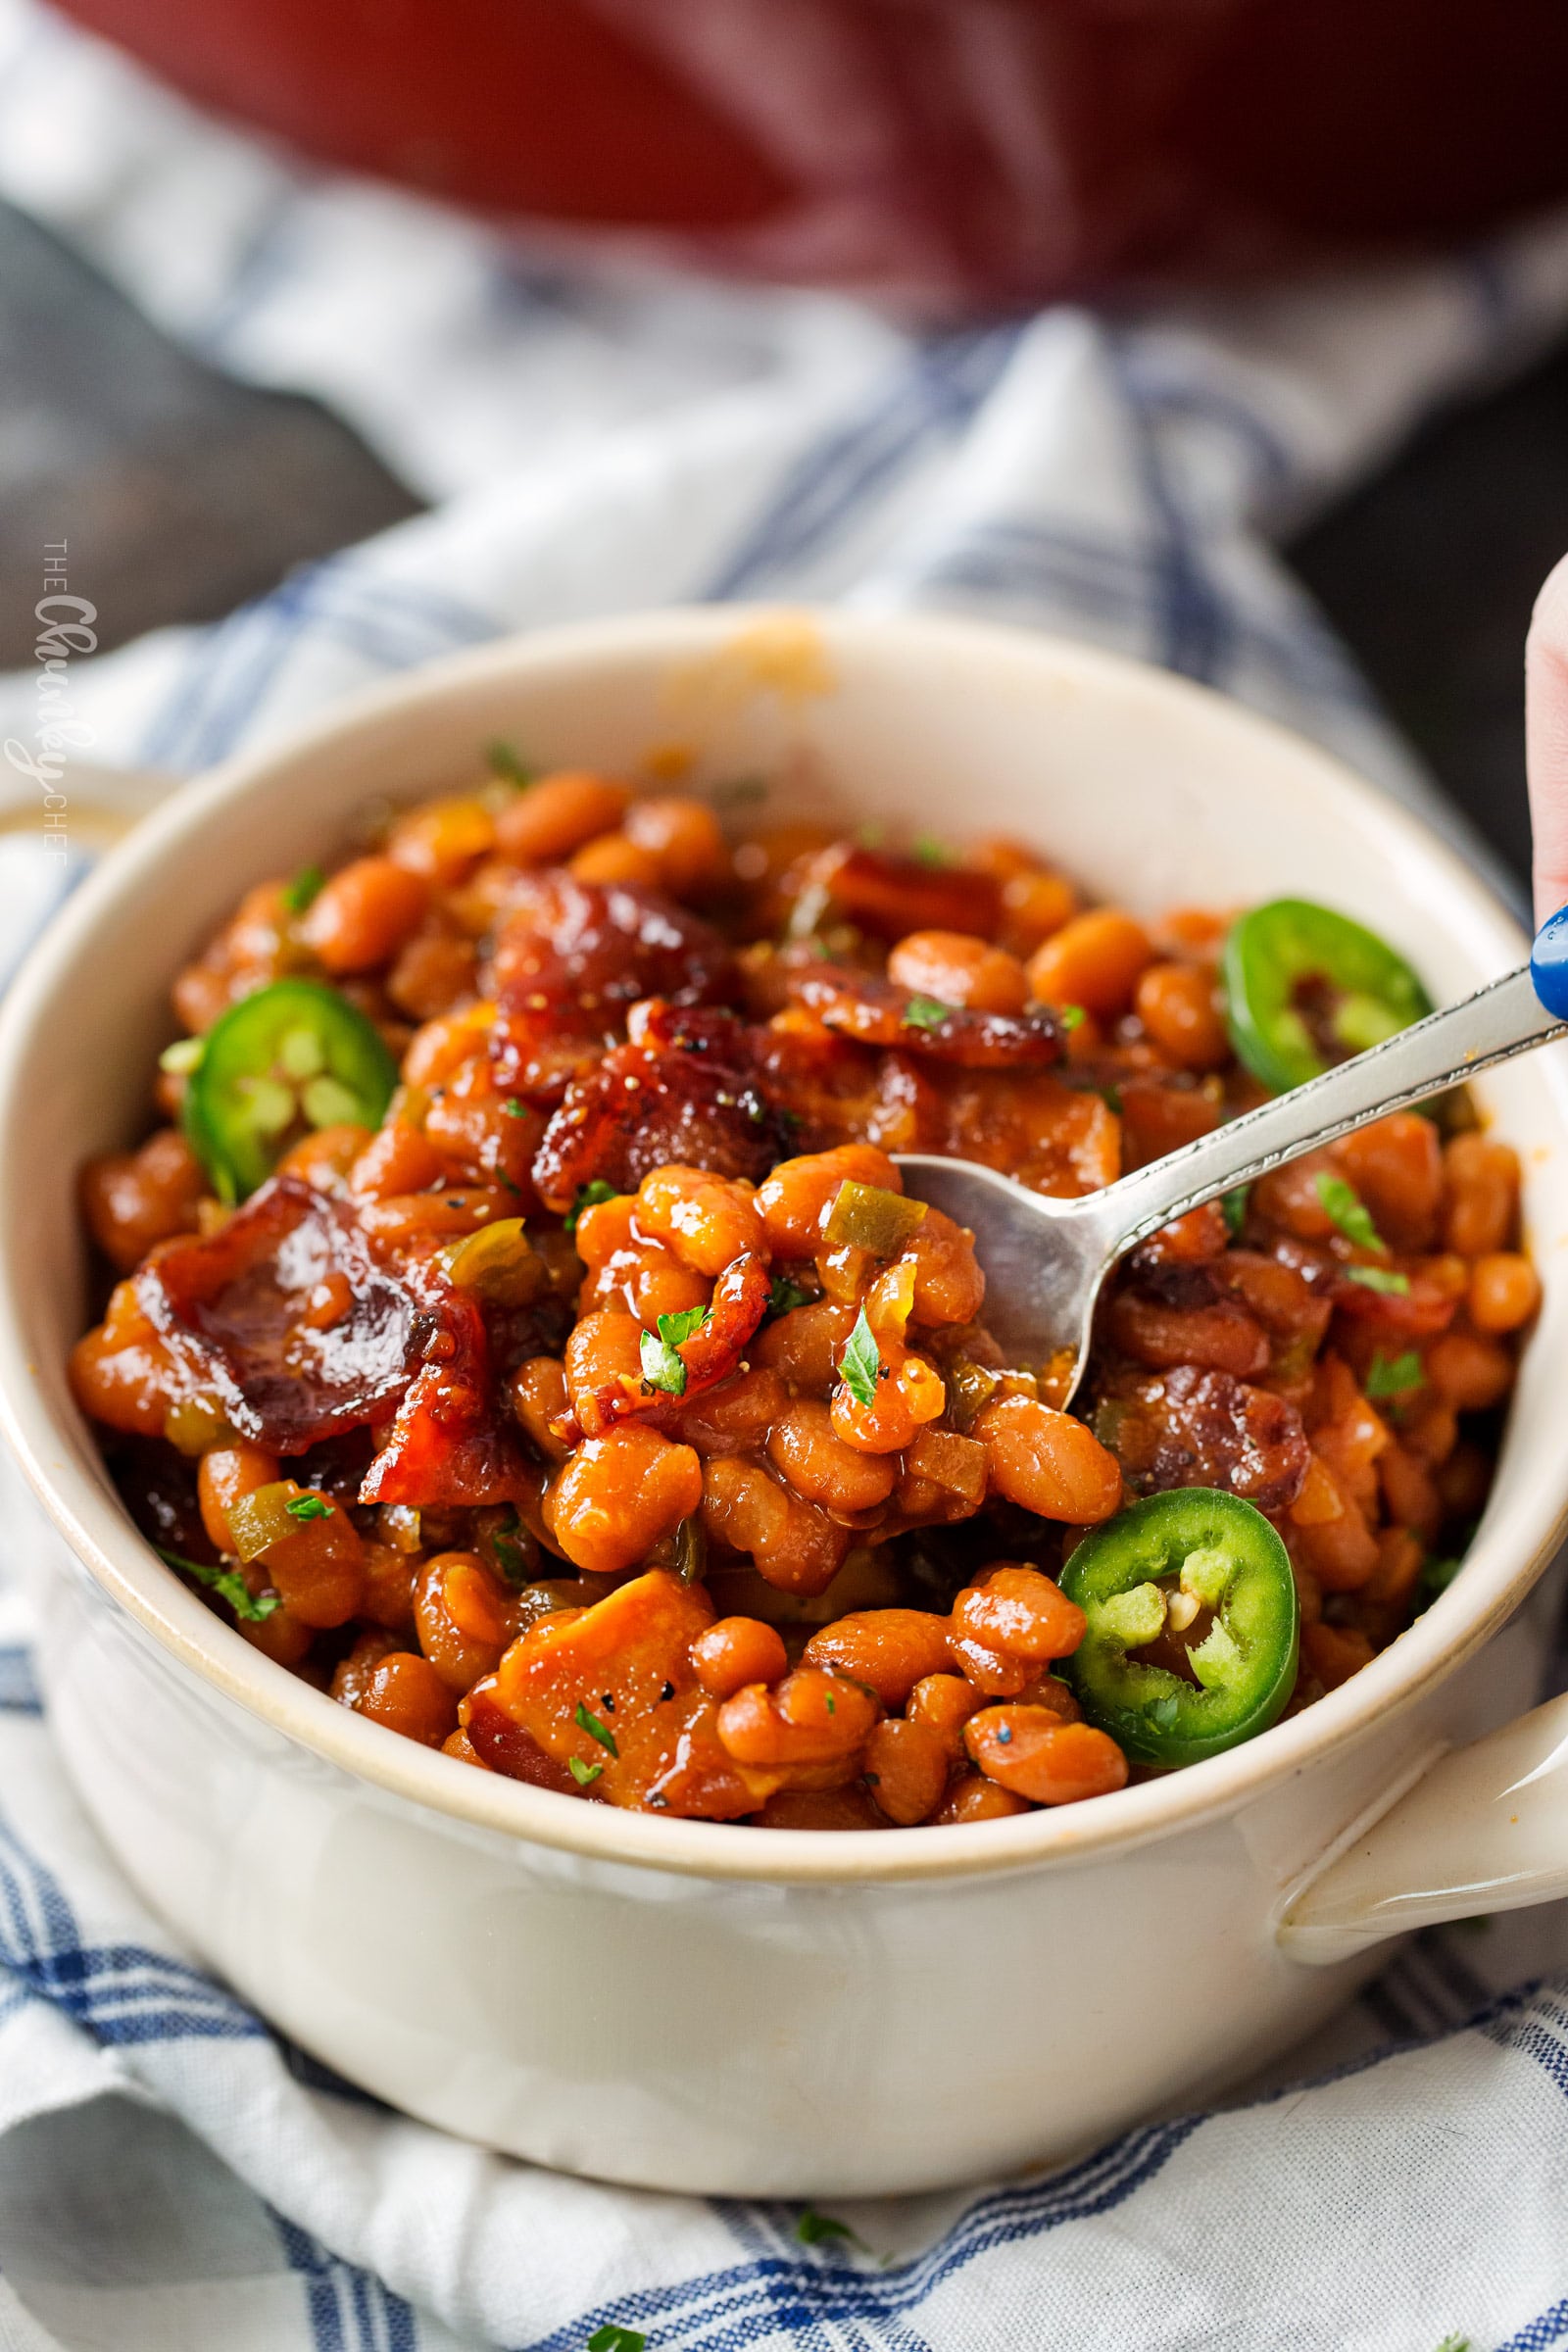 Spicy Baked Beans with Bacon | Perfect for cookouts or summer BBQ's, these baked beans with bacon have a mouthwatering spicy kick from jalapeños that make for an unforgettable side dish! | http://thechunkychef.com